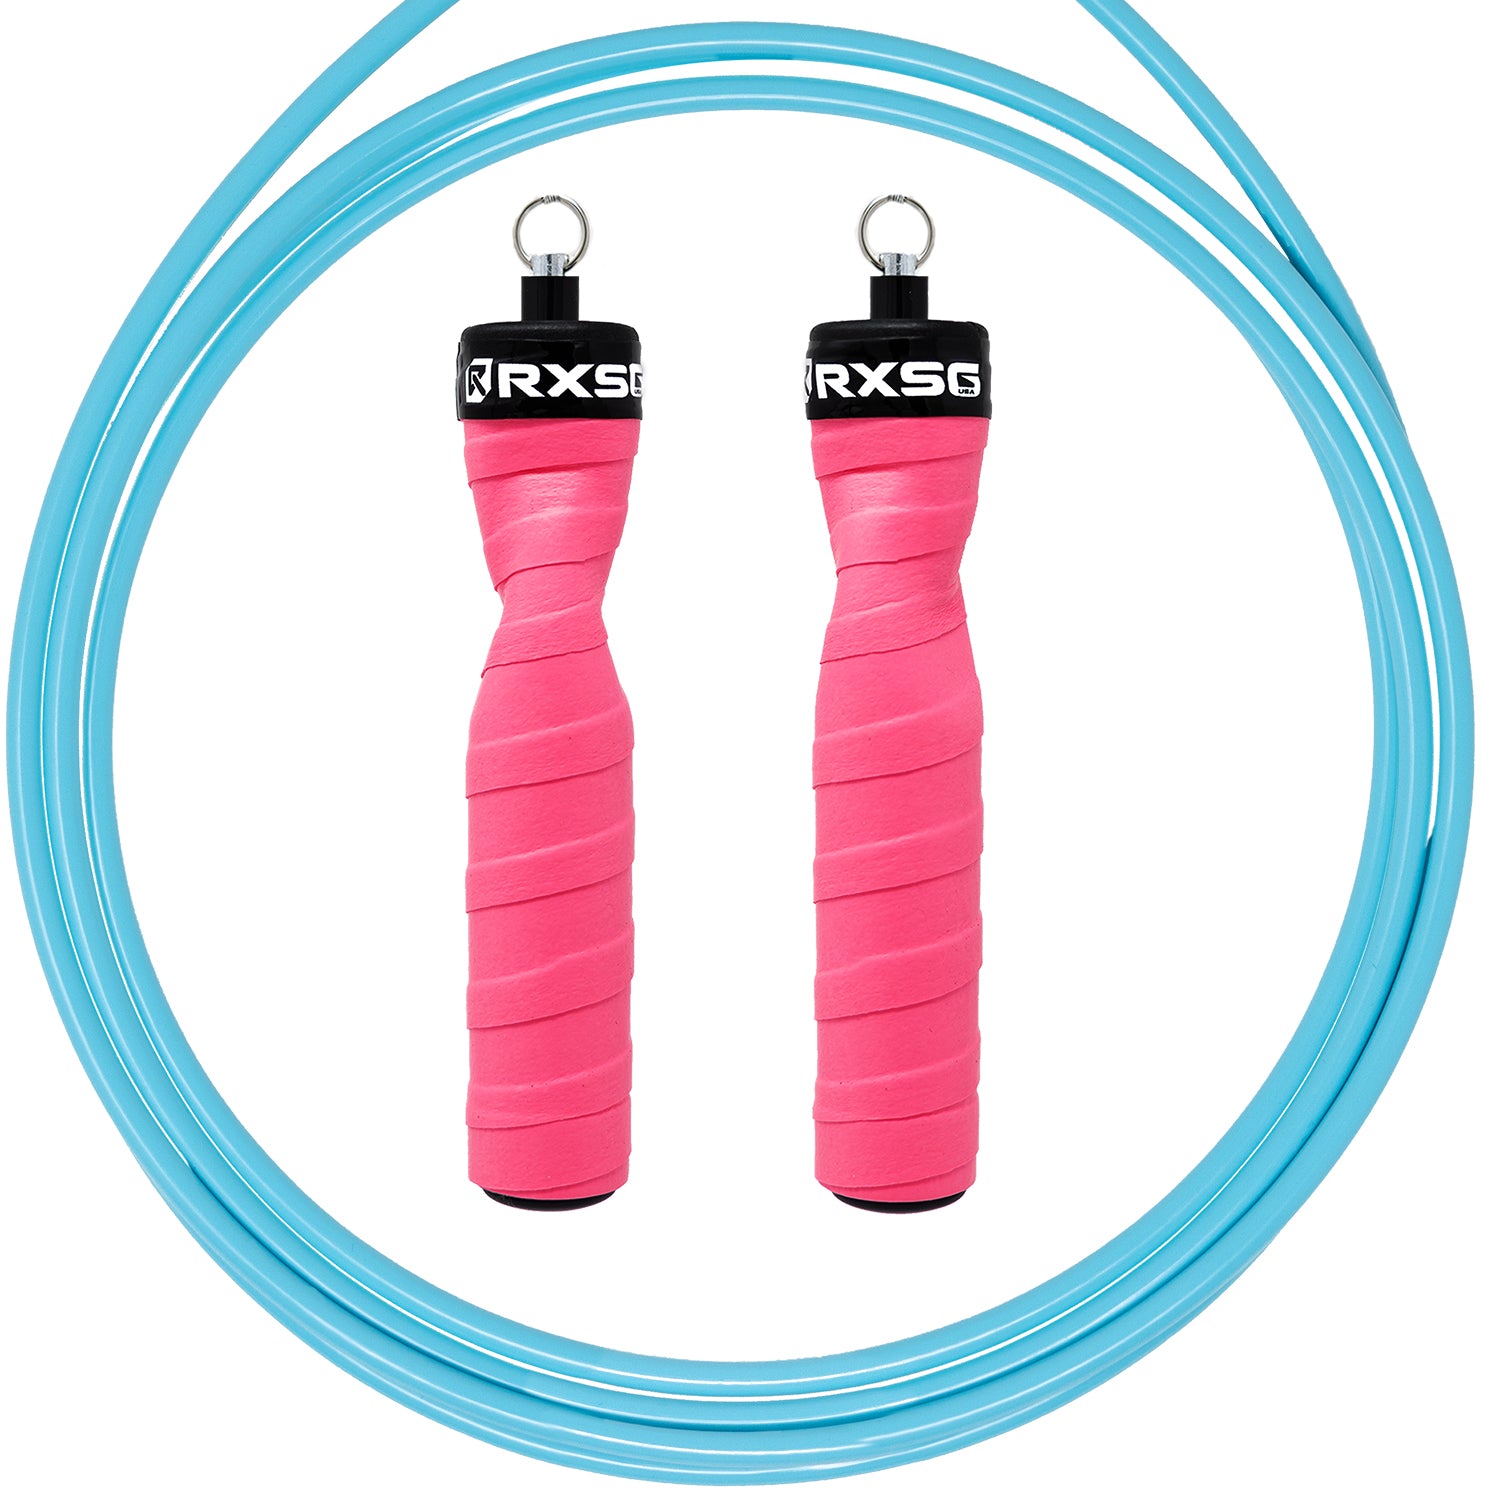  RXSG CustomFit Poppin Pink Jump Rope Teal Cable